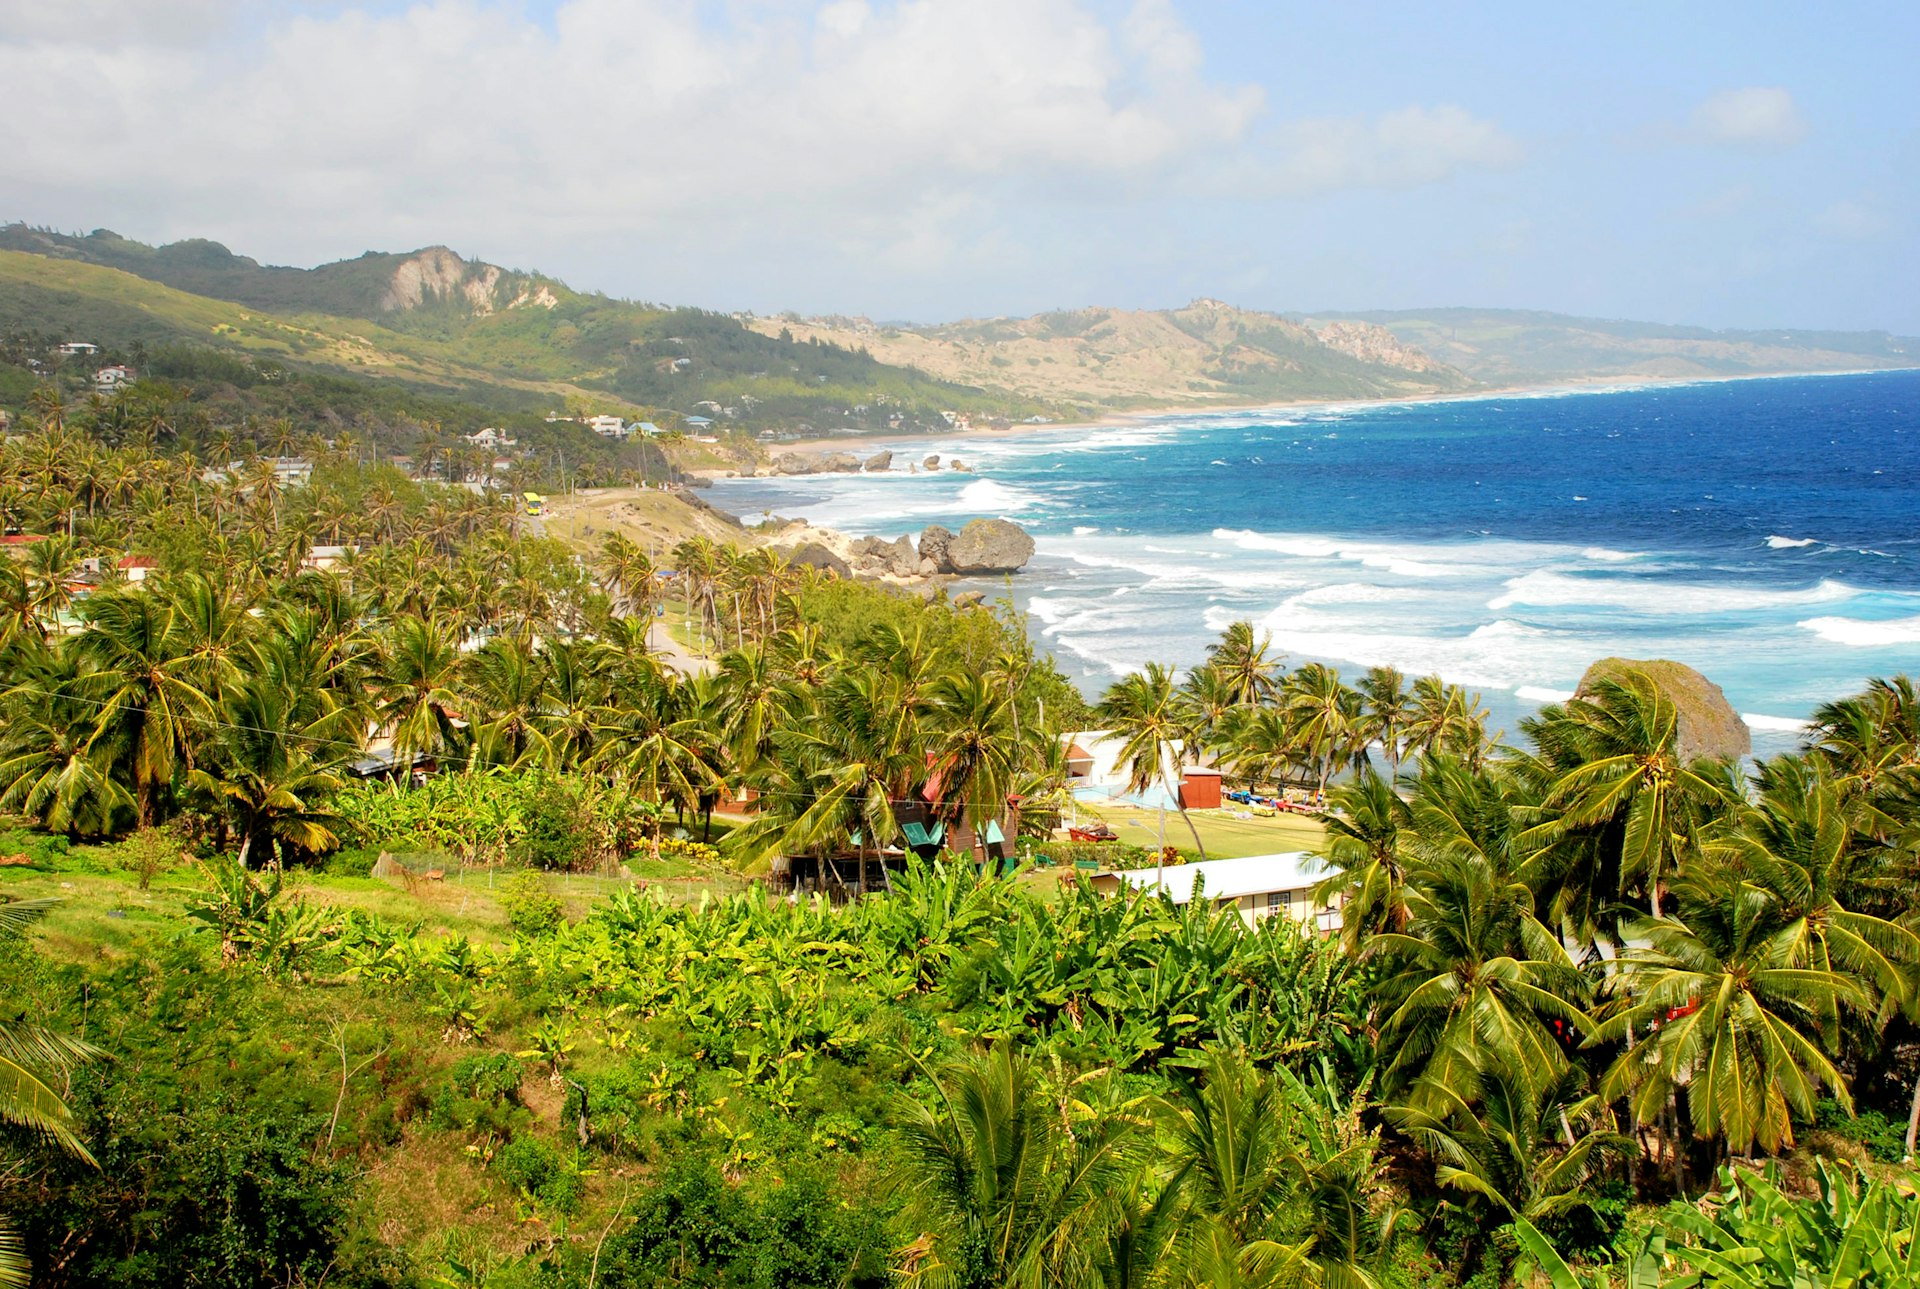 Panoramic view of the surfer beach Bathsheba on a partly cloudy day